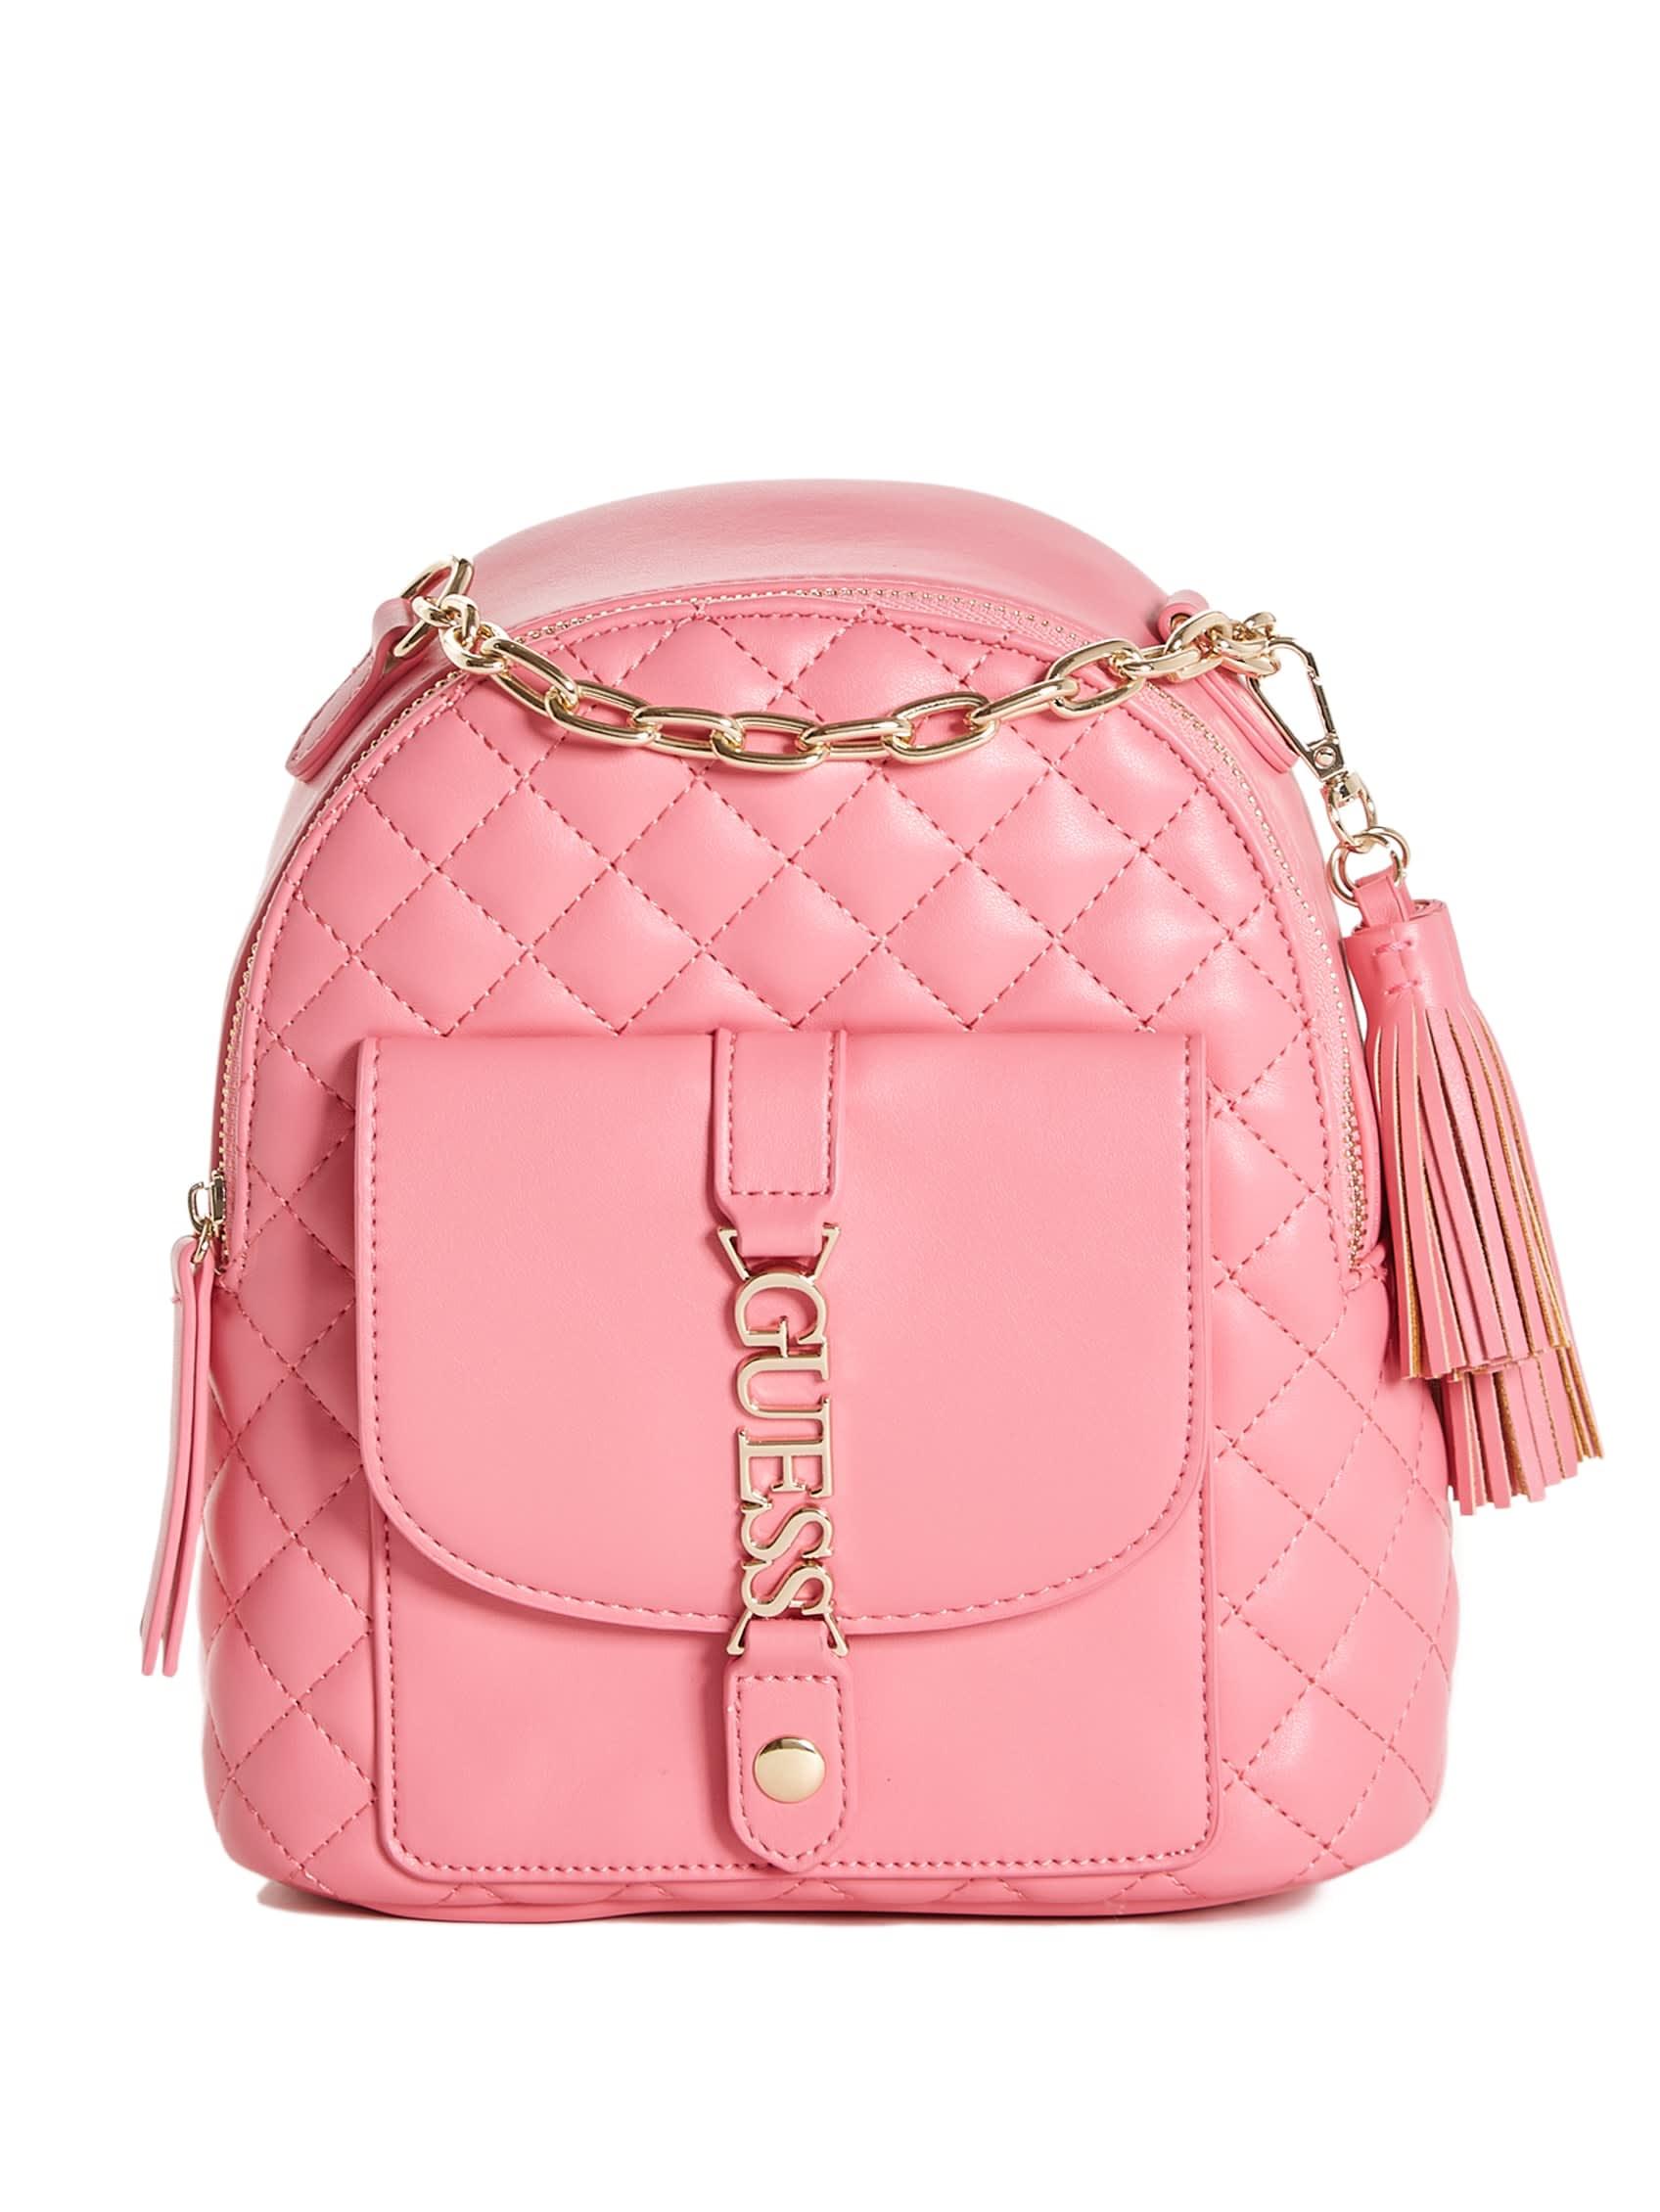 Guess Factory Marley Backpack in Pink | Lyst